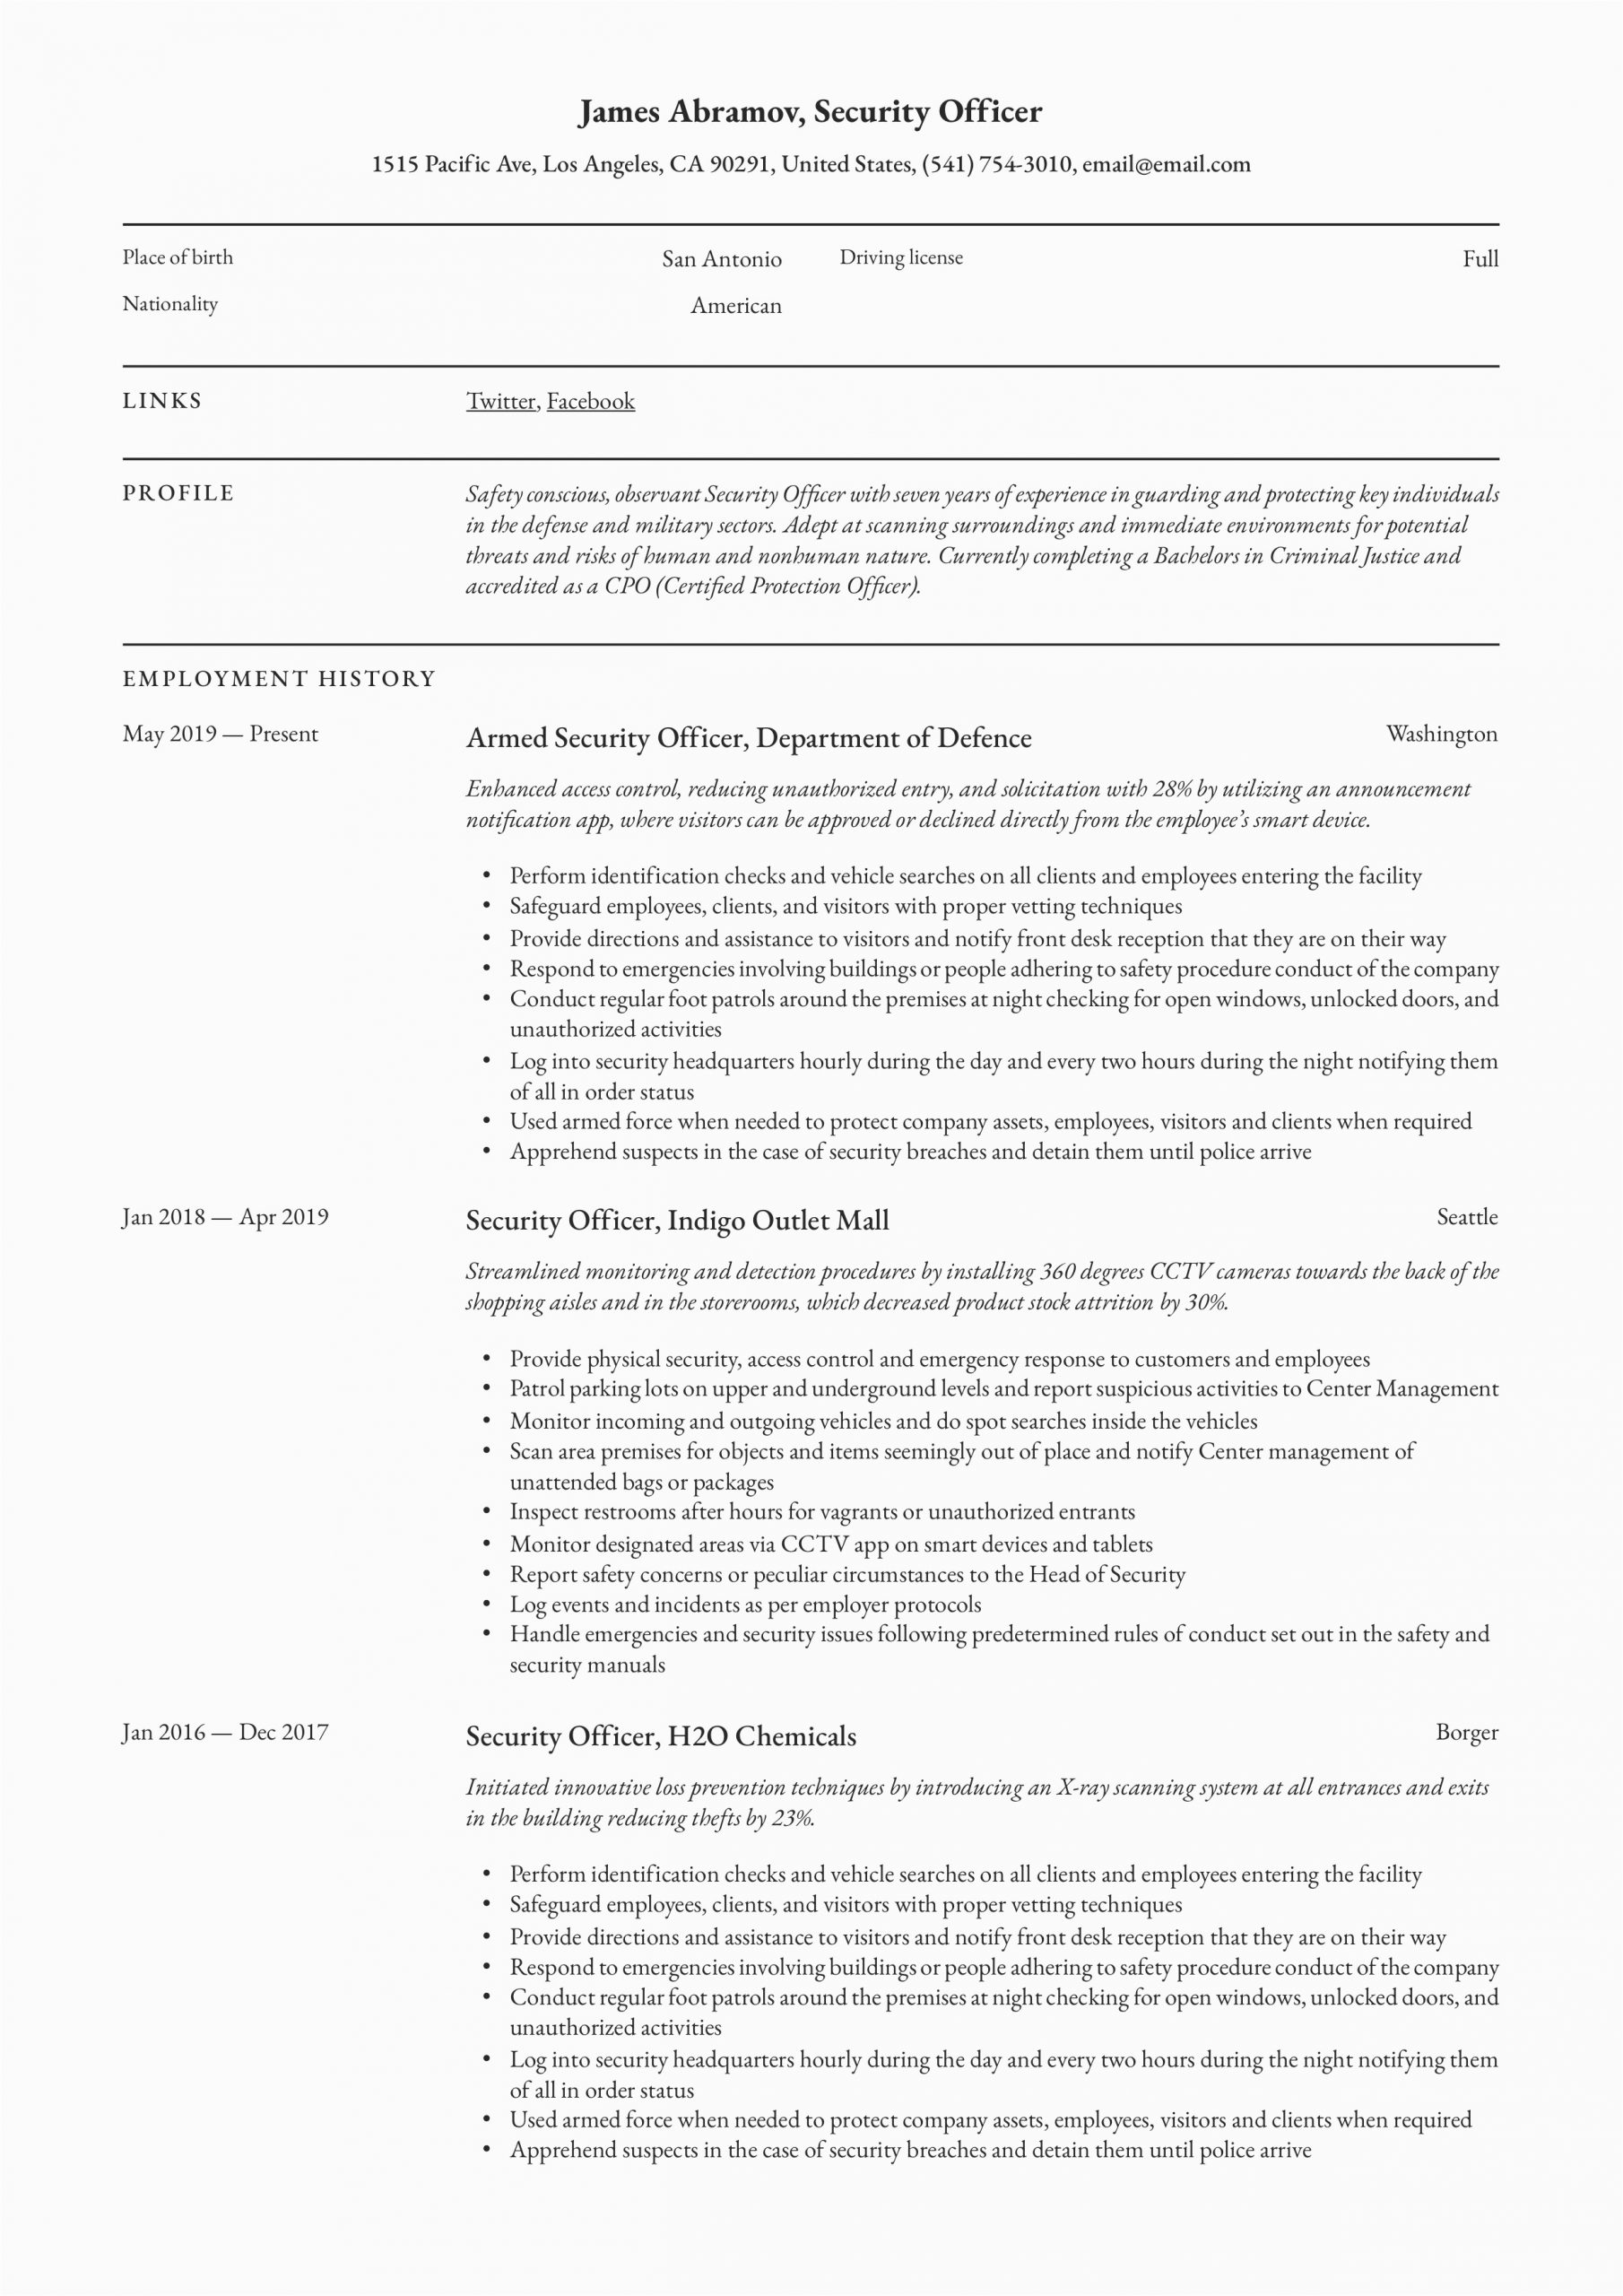 Sample Resume for Security Officer In India Security Ficer Resume & Writing Guide